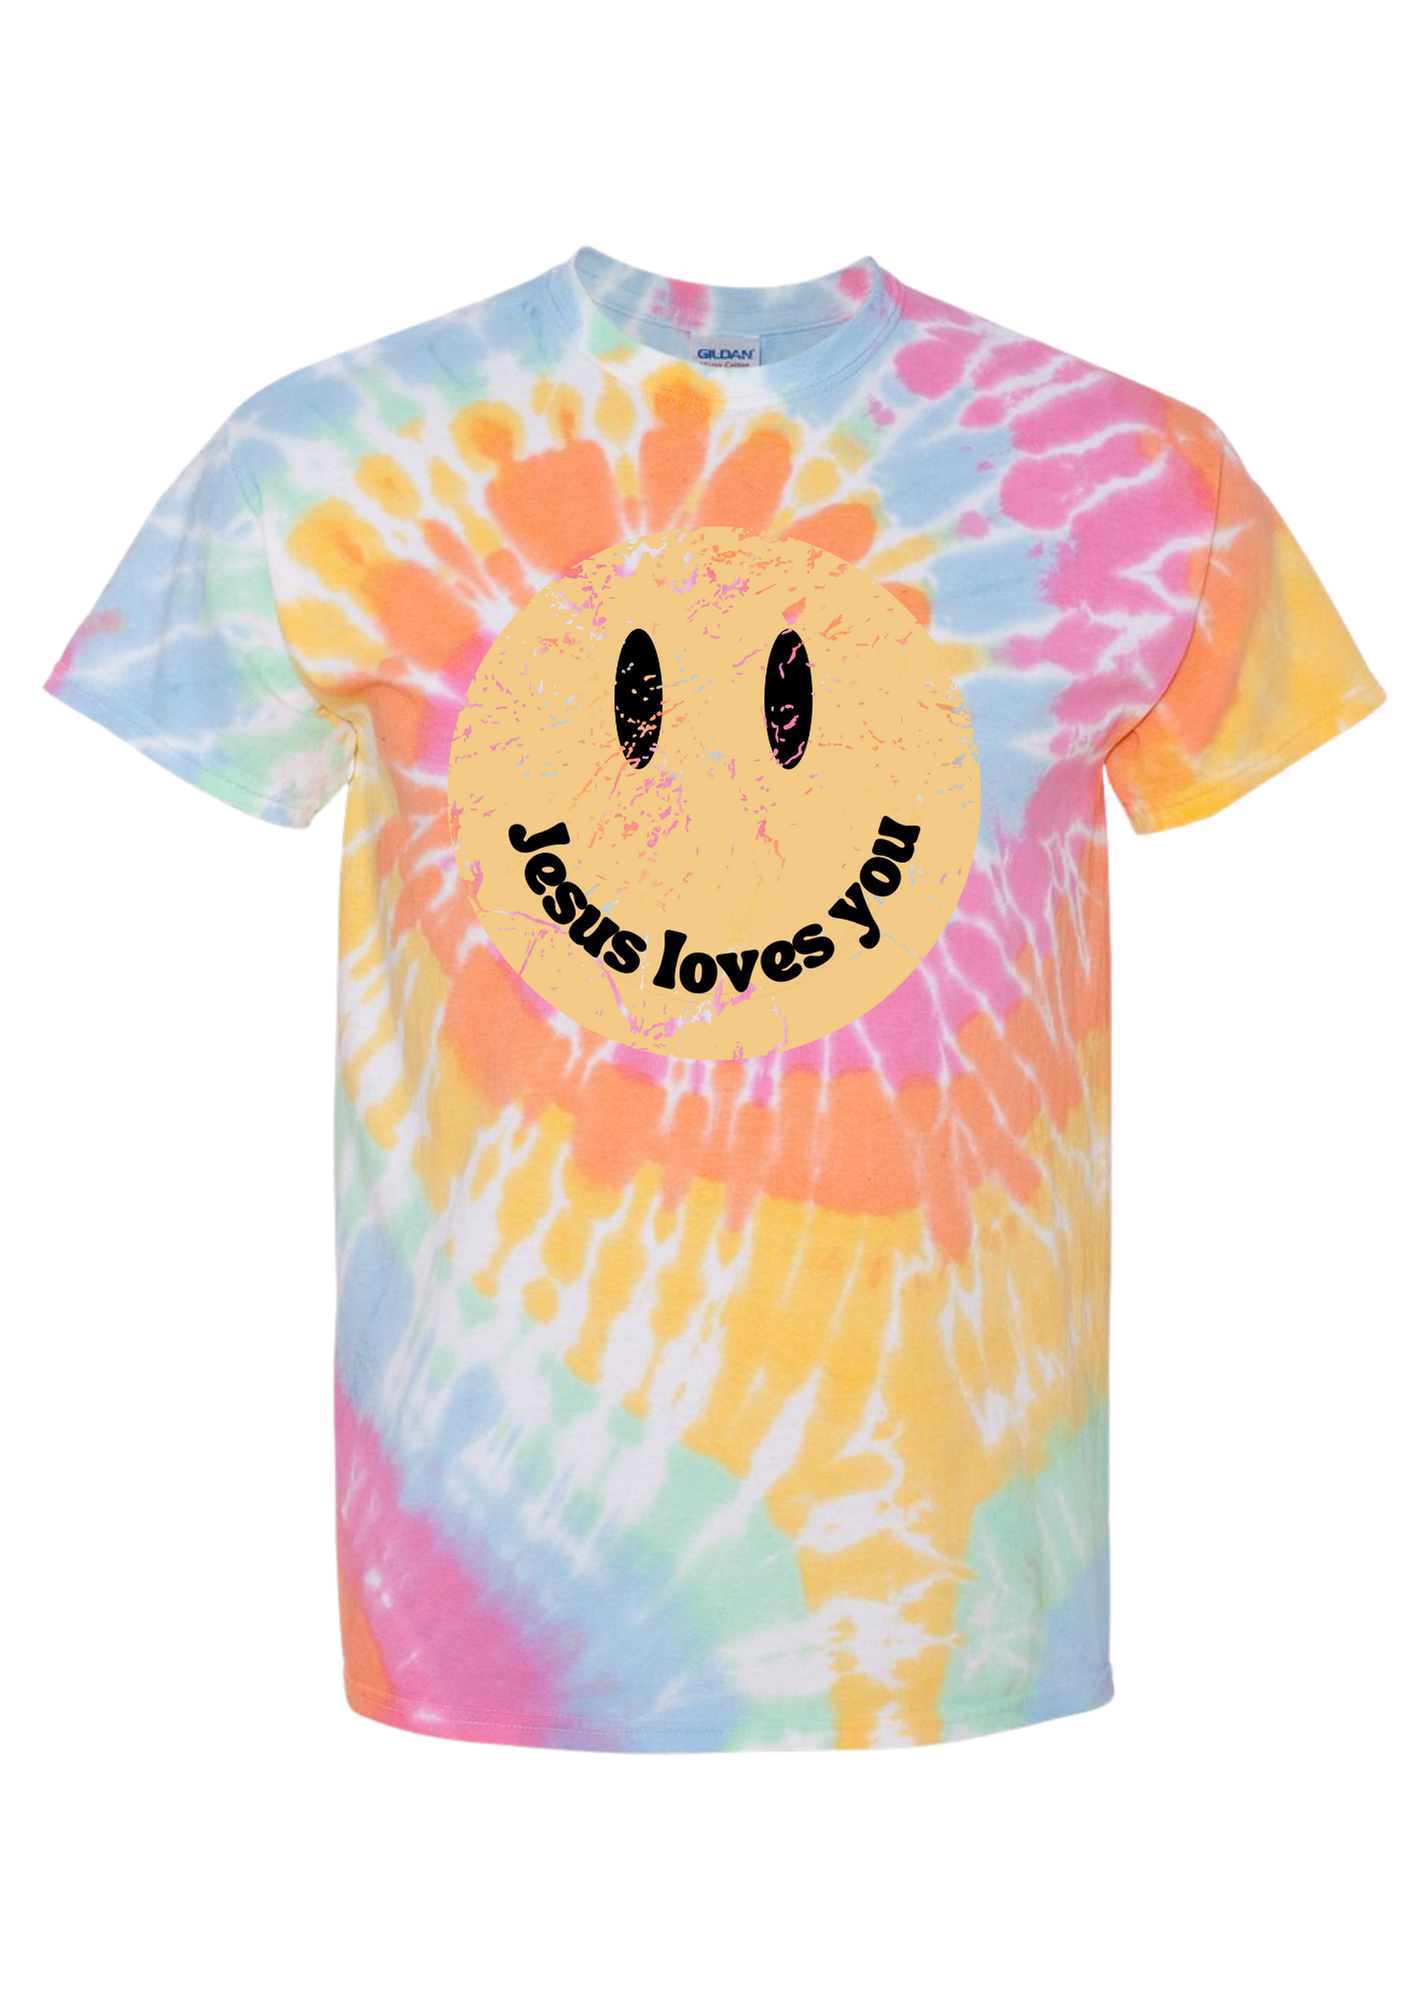 Jesus Loves You | Tie Dye Smiley | Tee | Adult-Sister Shirts-Sister Shirts, Cute & Custom Tees for Mama & Littles in Trussville, Alabama.